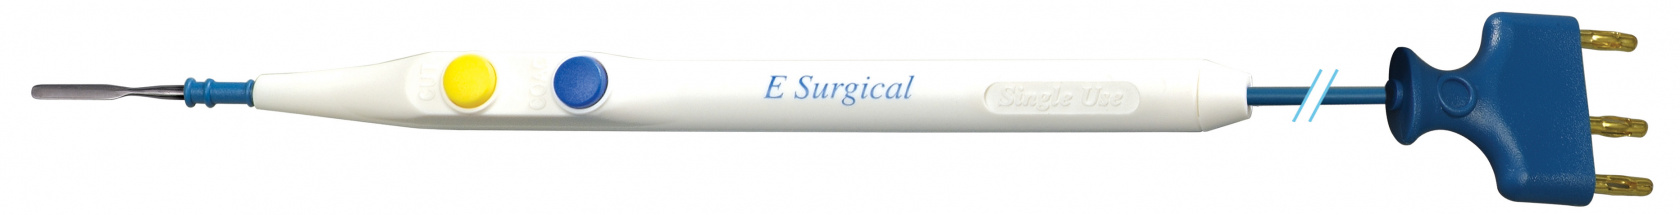 E Surgical Diathermy ECU Pencil 2.5in Std Blade Sterile EACHES image 0